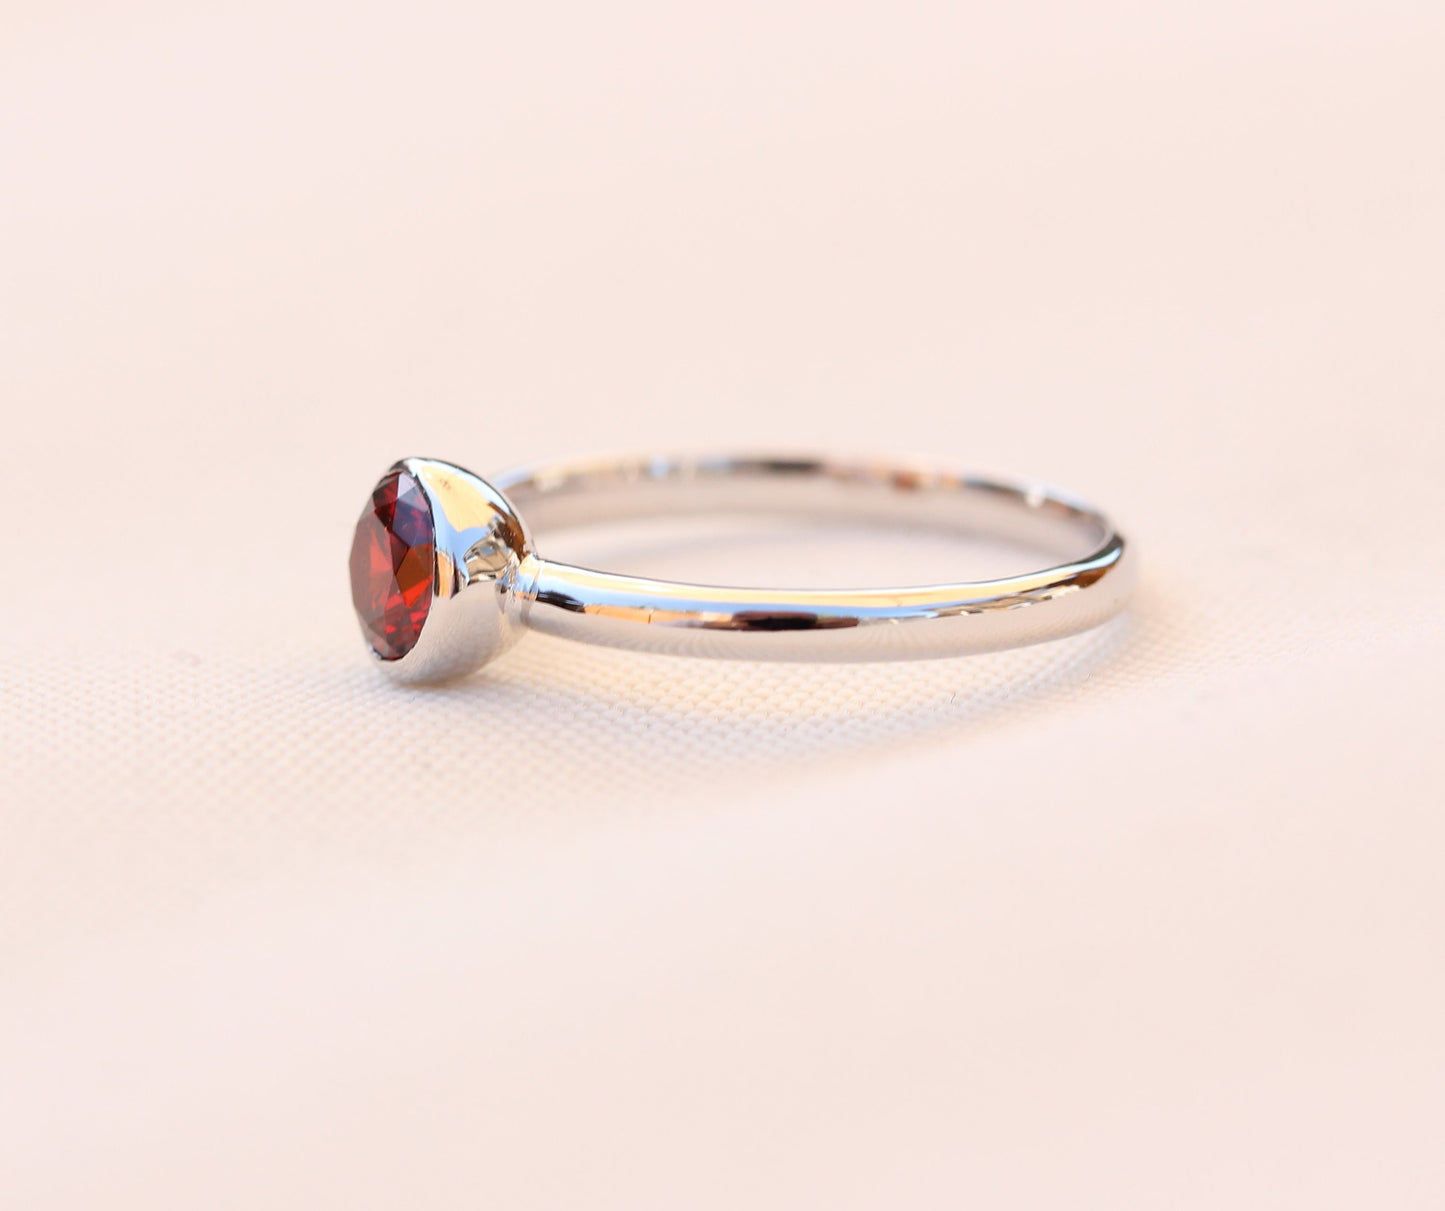 Natural Garnet bezel set solitaire ring - Available in white gold or sterling silver - handmade ring